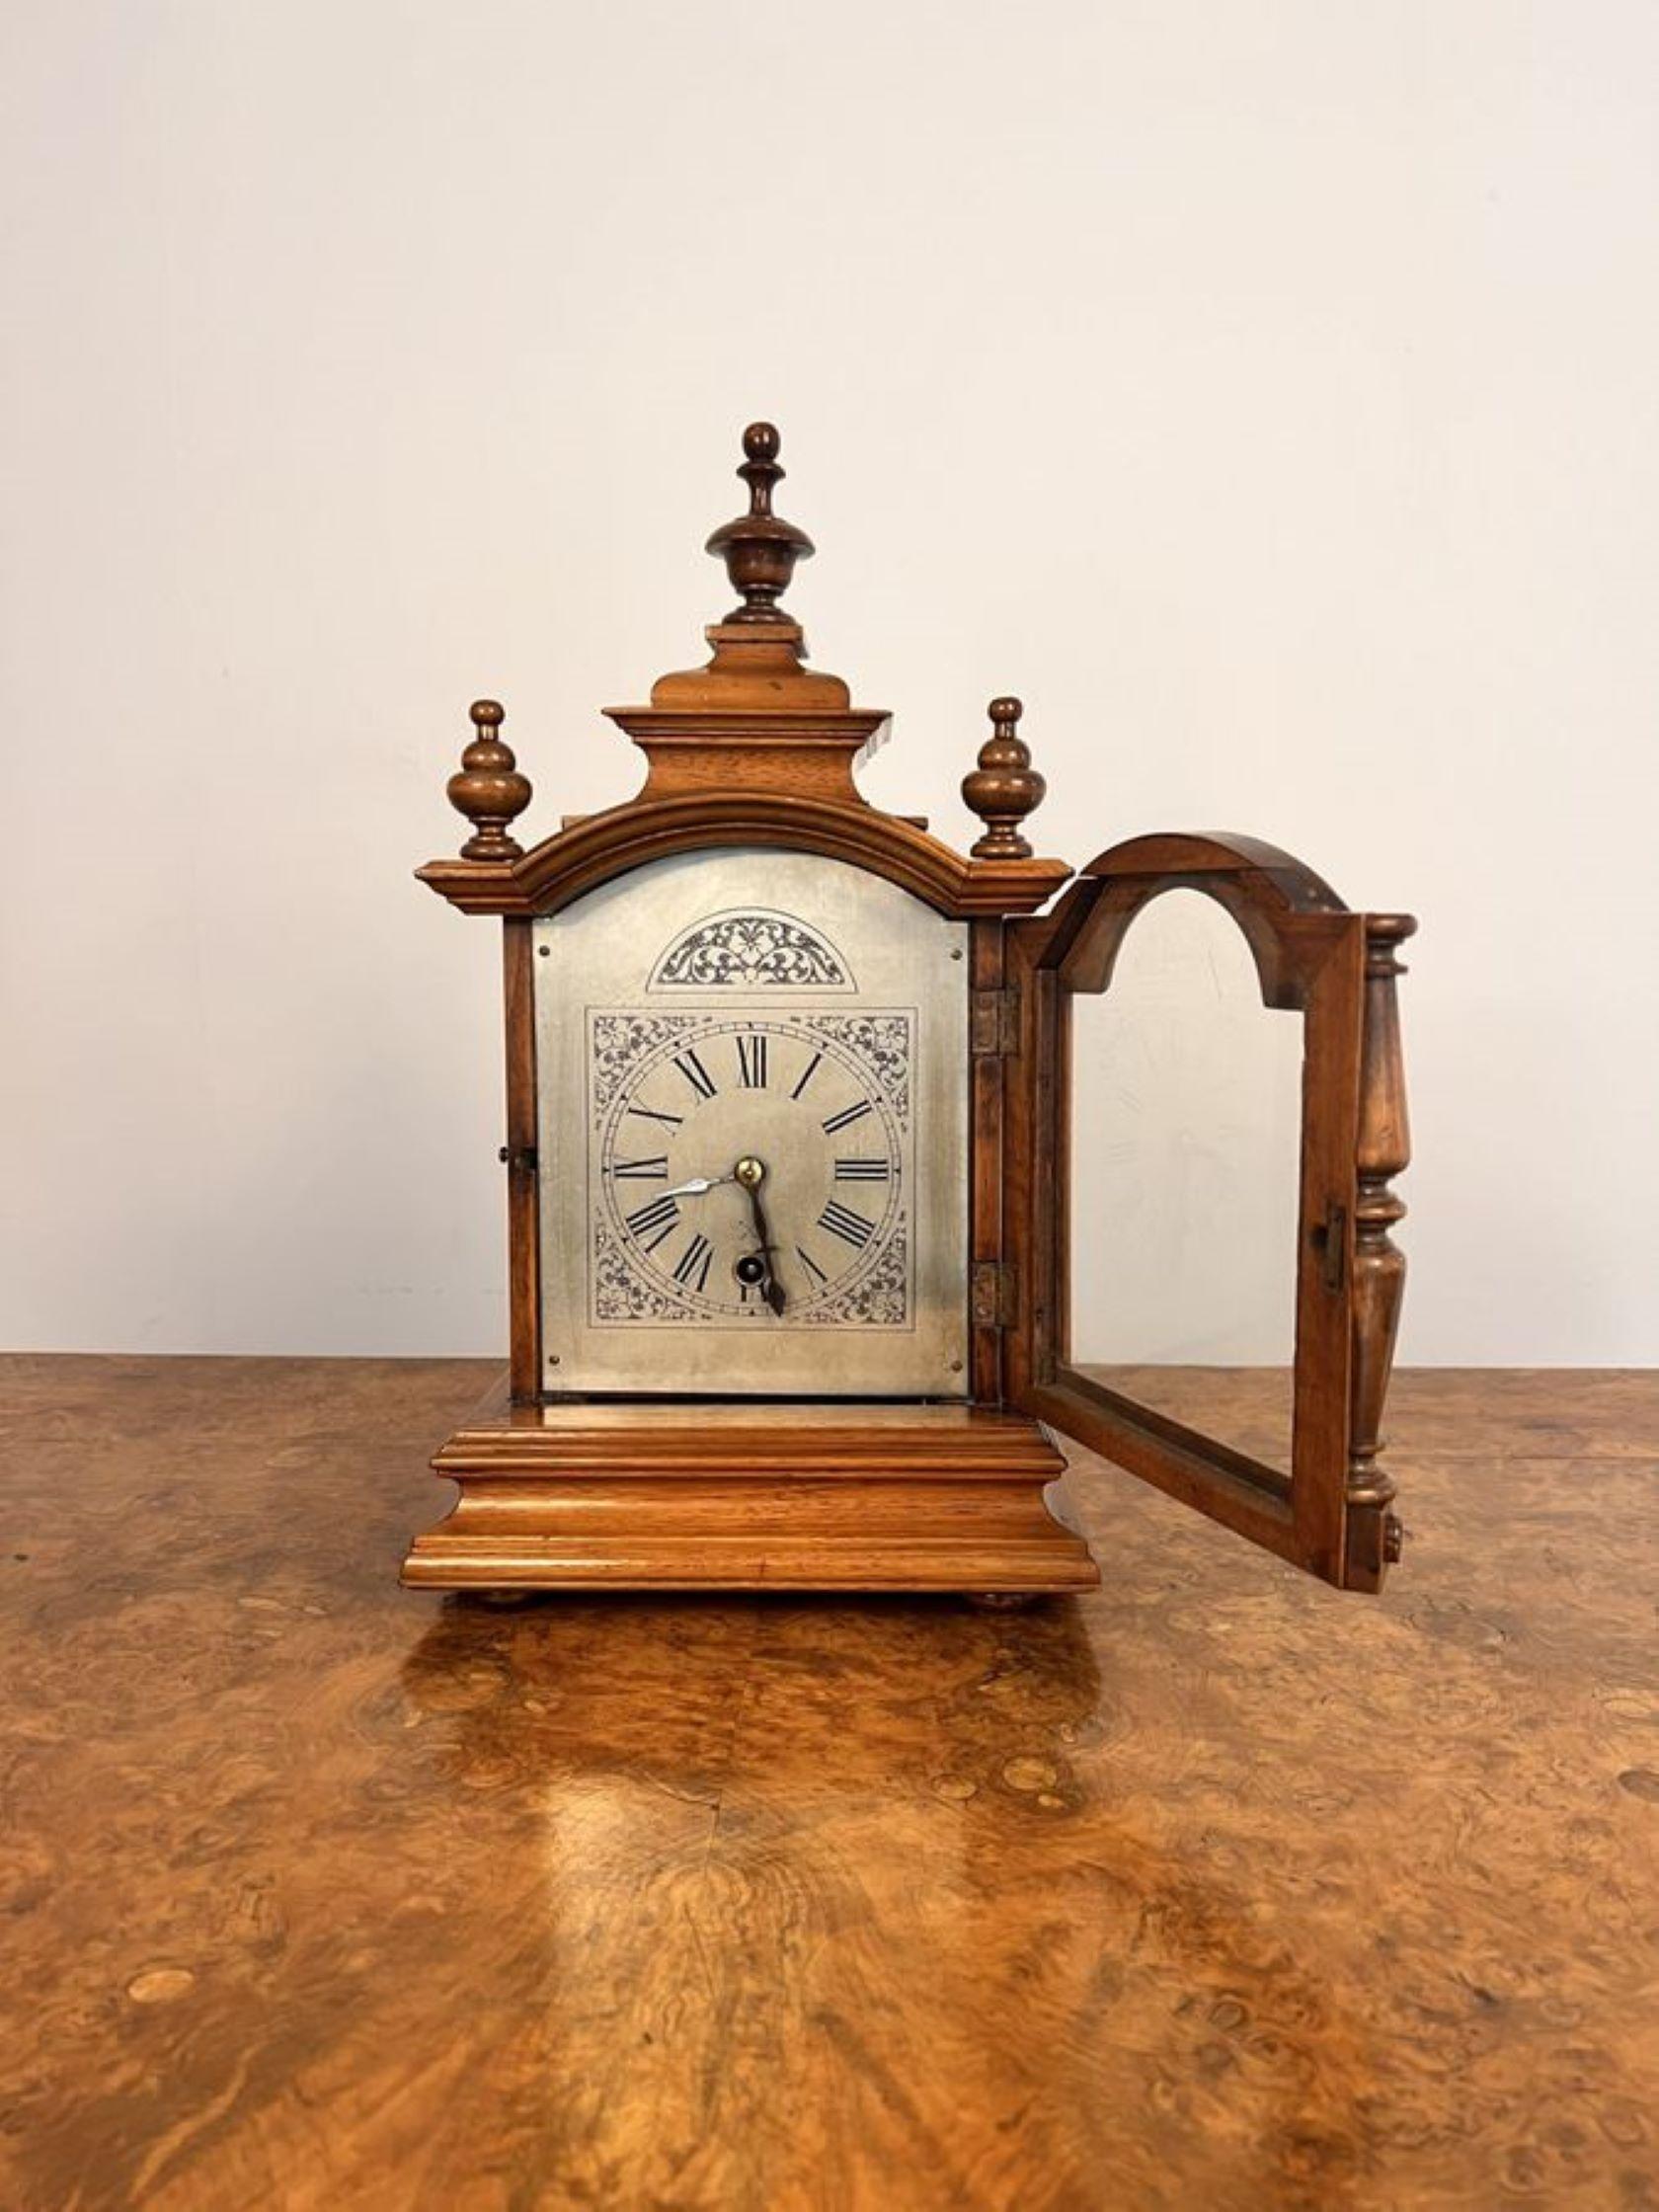 Lovely antique German Black Forest mantle clock, having a quality walnut case with turned columns shaped top with the original finales, standing on a stepped base, silvered arched engraved dial with Roman numerals and the original hands having an